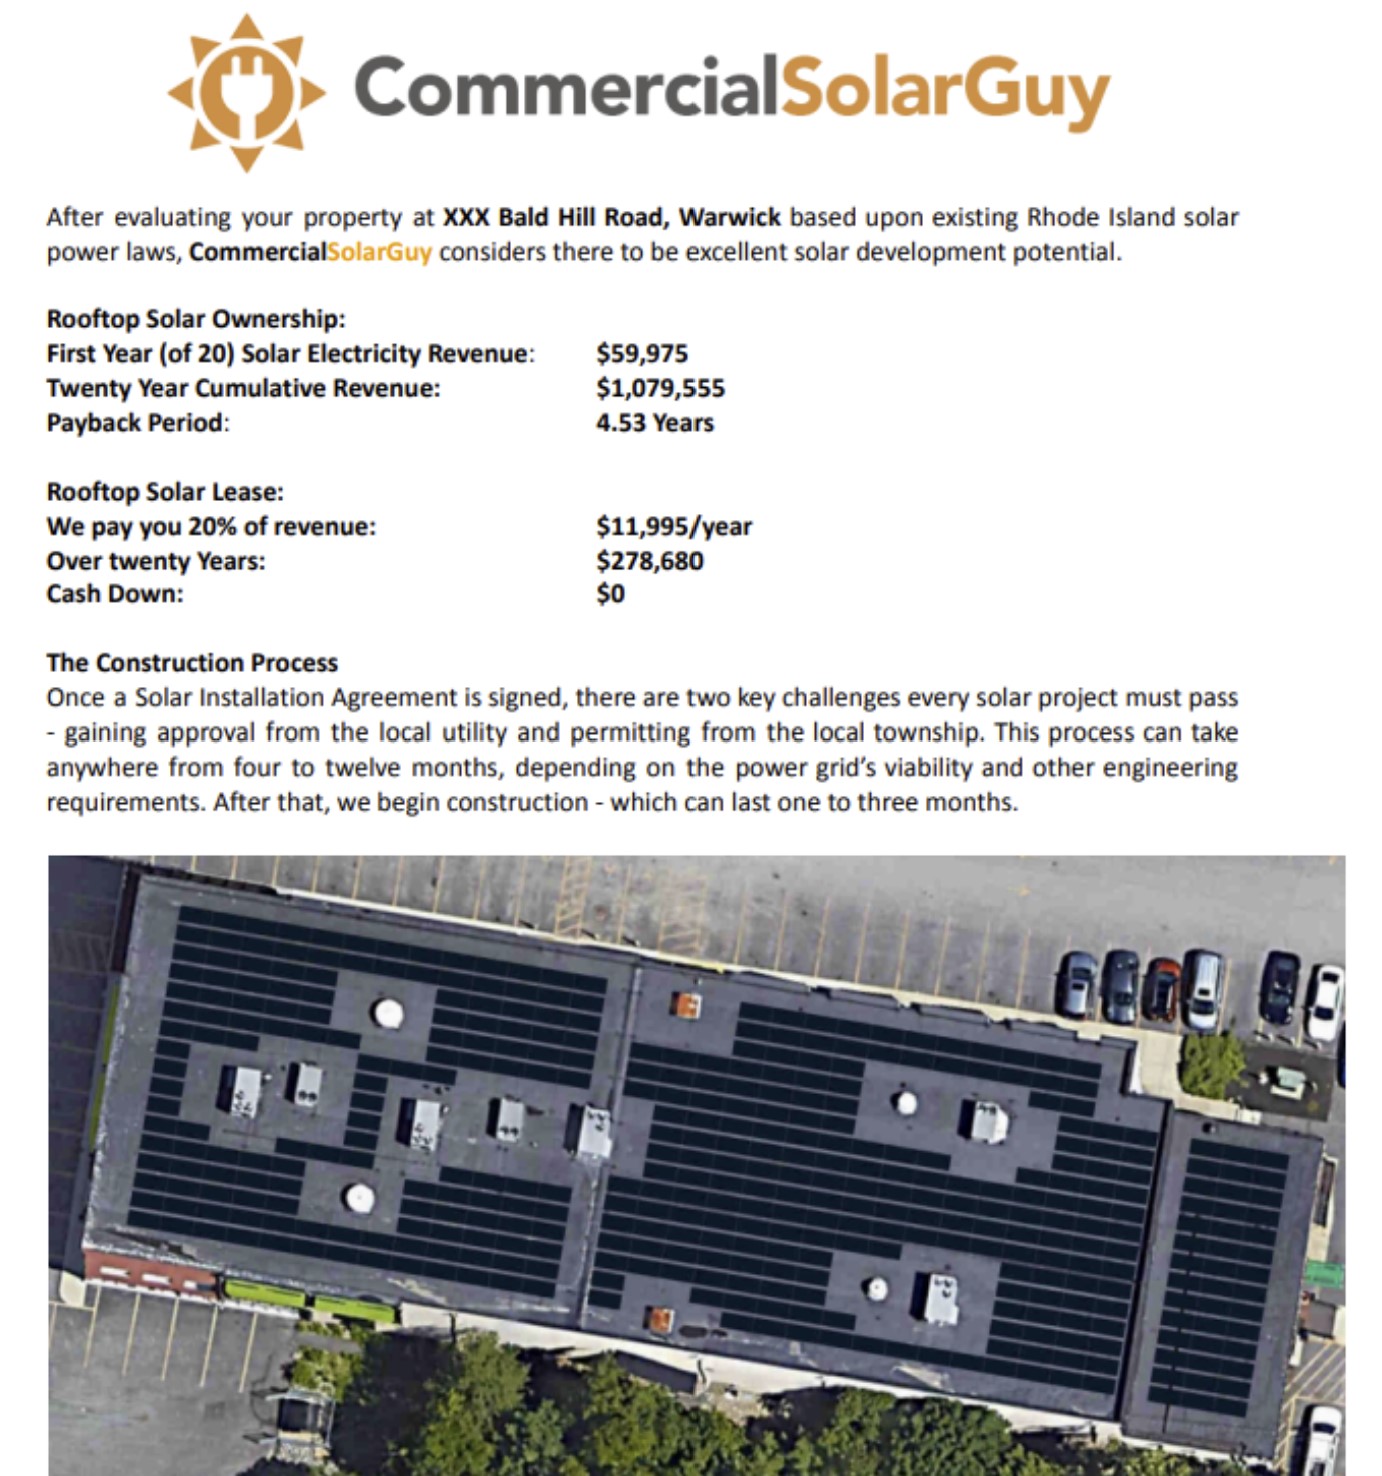 Solar Lease Proposal in Rhode Island from Commercial Solar Guy